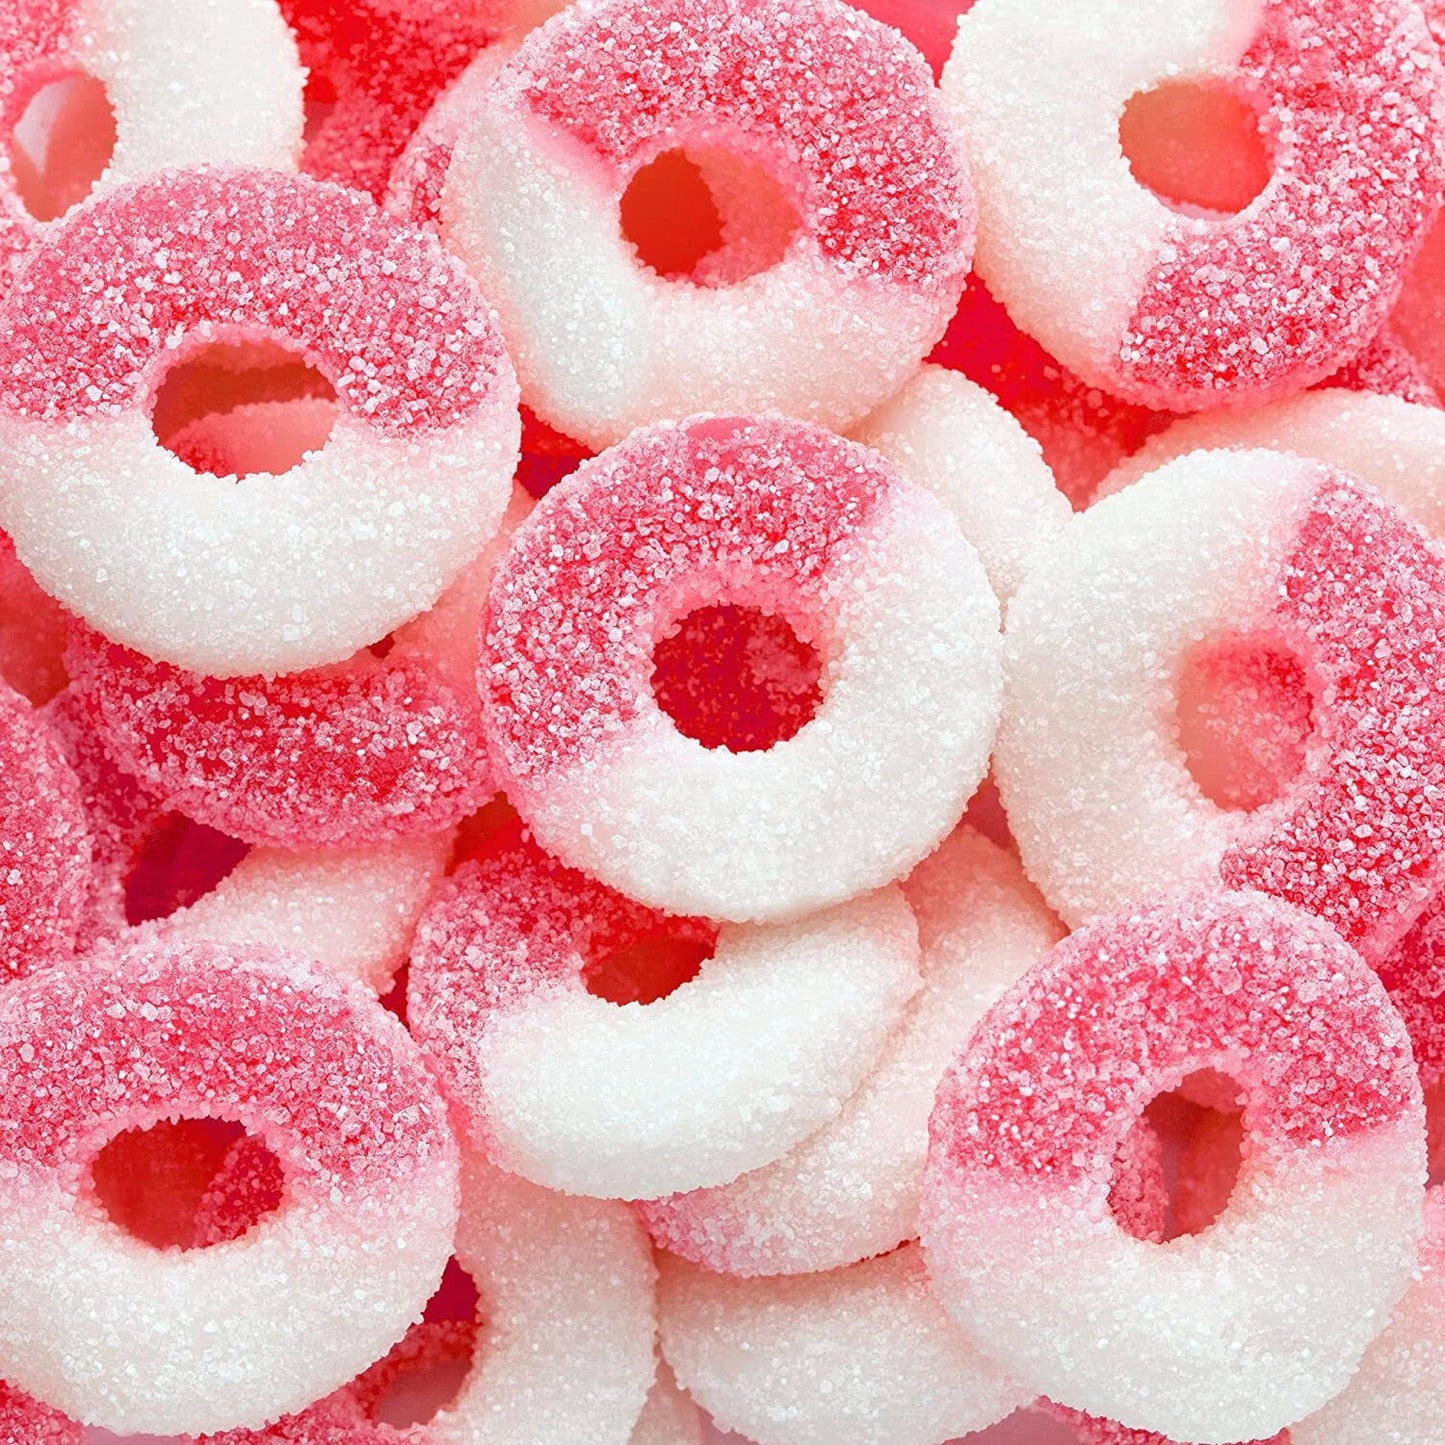 Watermelon Rings available from Stage Stop Candy on Cape Cod